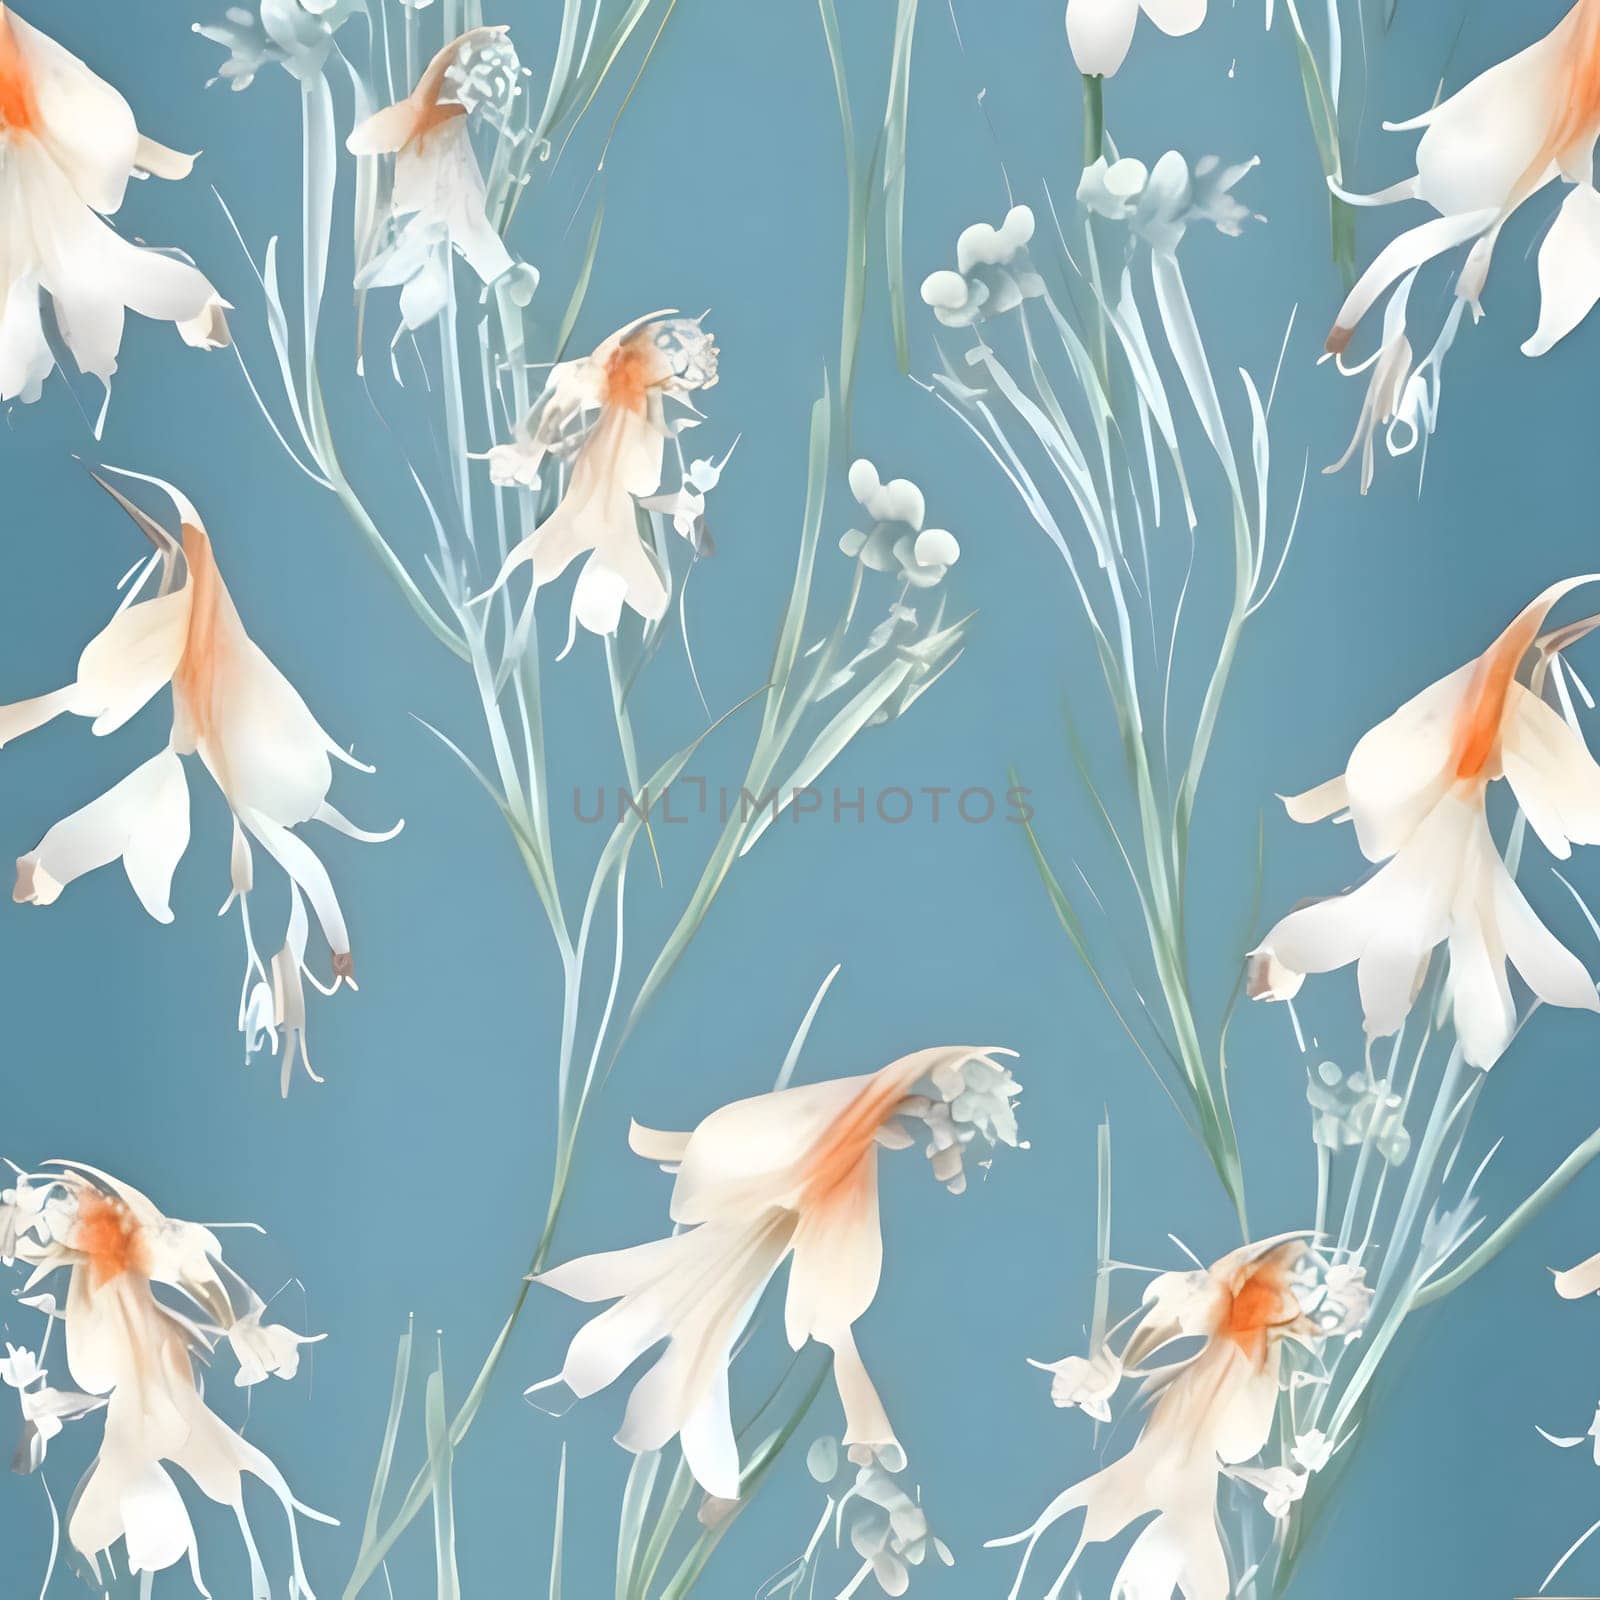 Patterns and banners backgrounds: Seamless pattern with Narcissus flowers, watercolor illustration